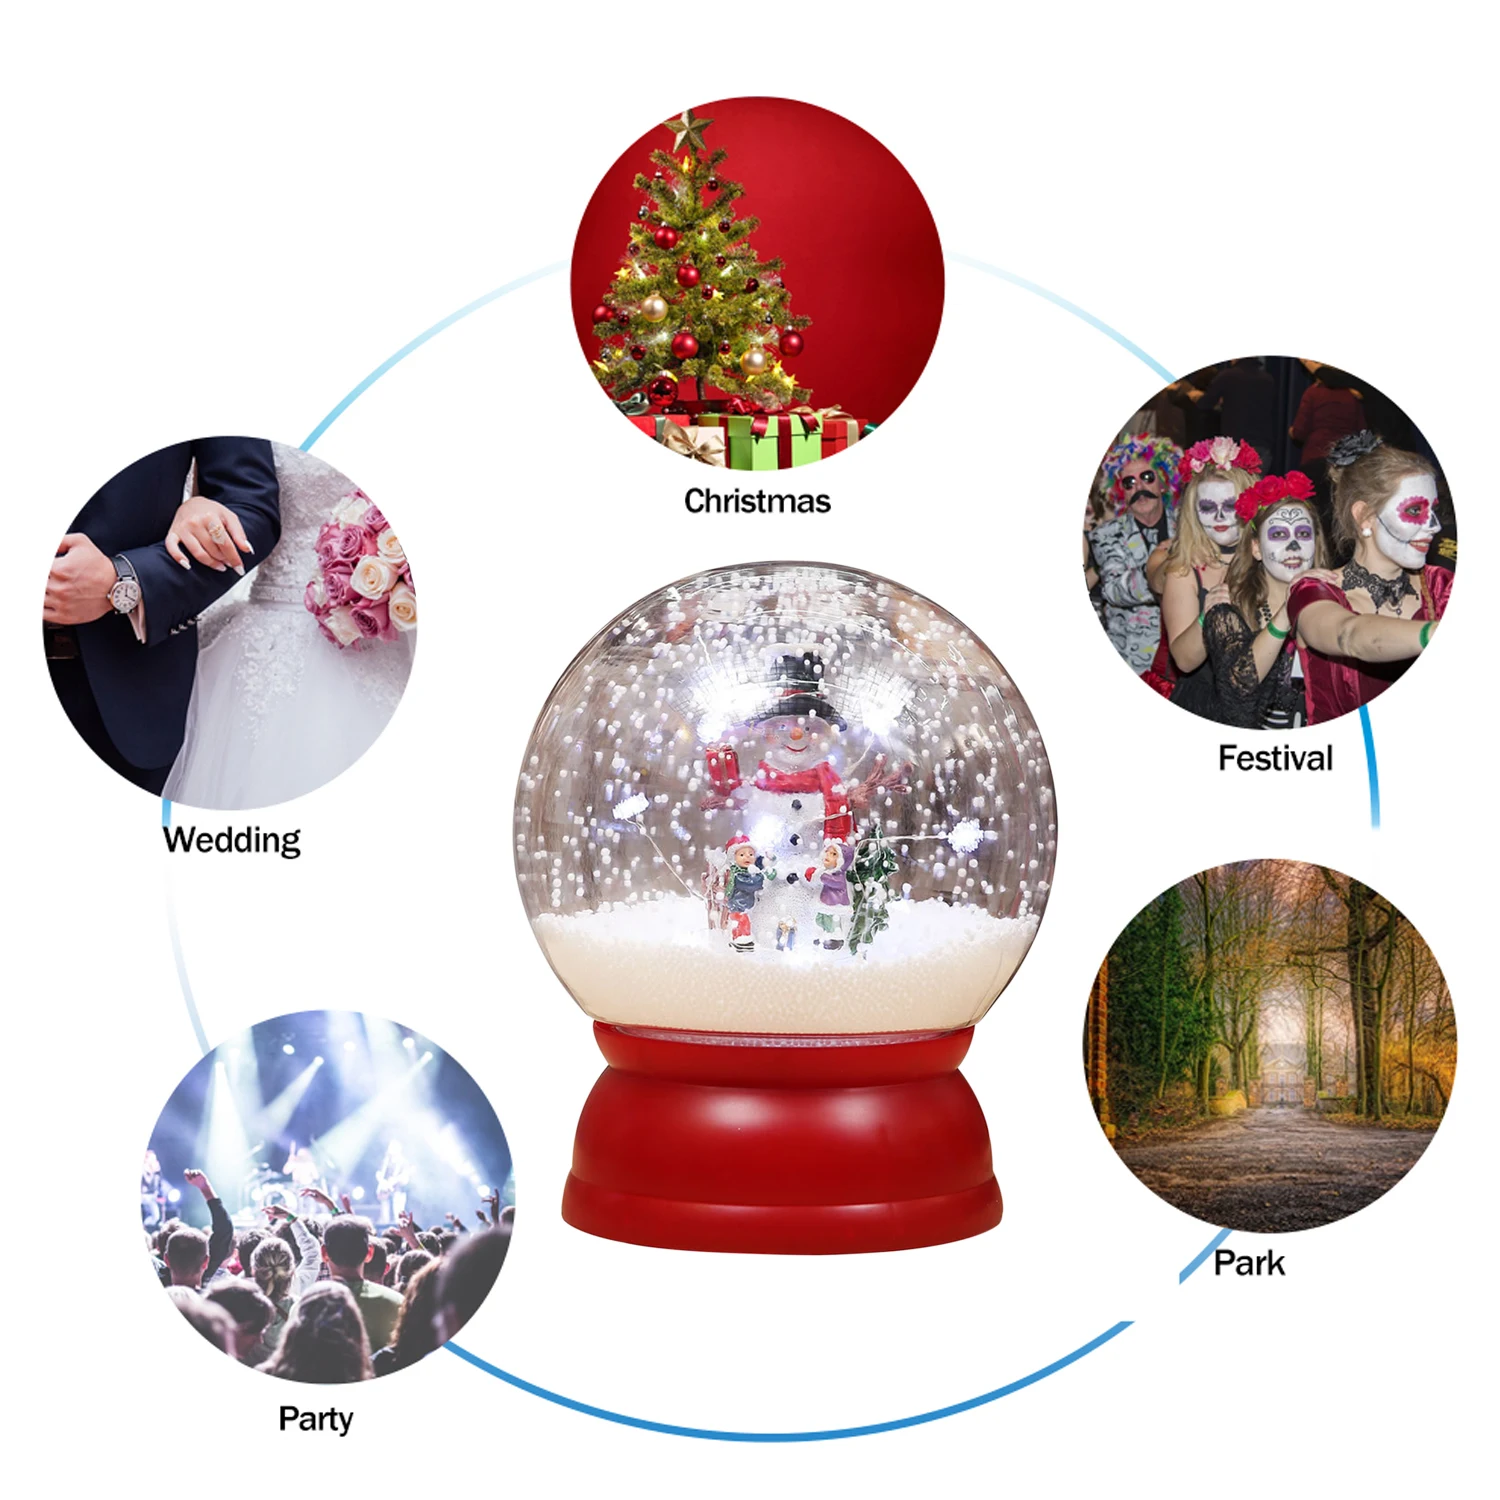 Battery or Mains Operated Christmas Water Filled Magical Lanterns AC/DC Mains Adaptor Lead Snow Globes Phone Boxes Decoration